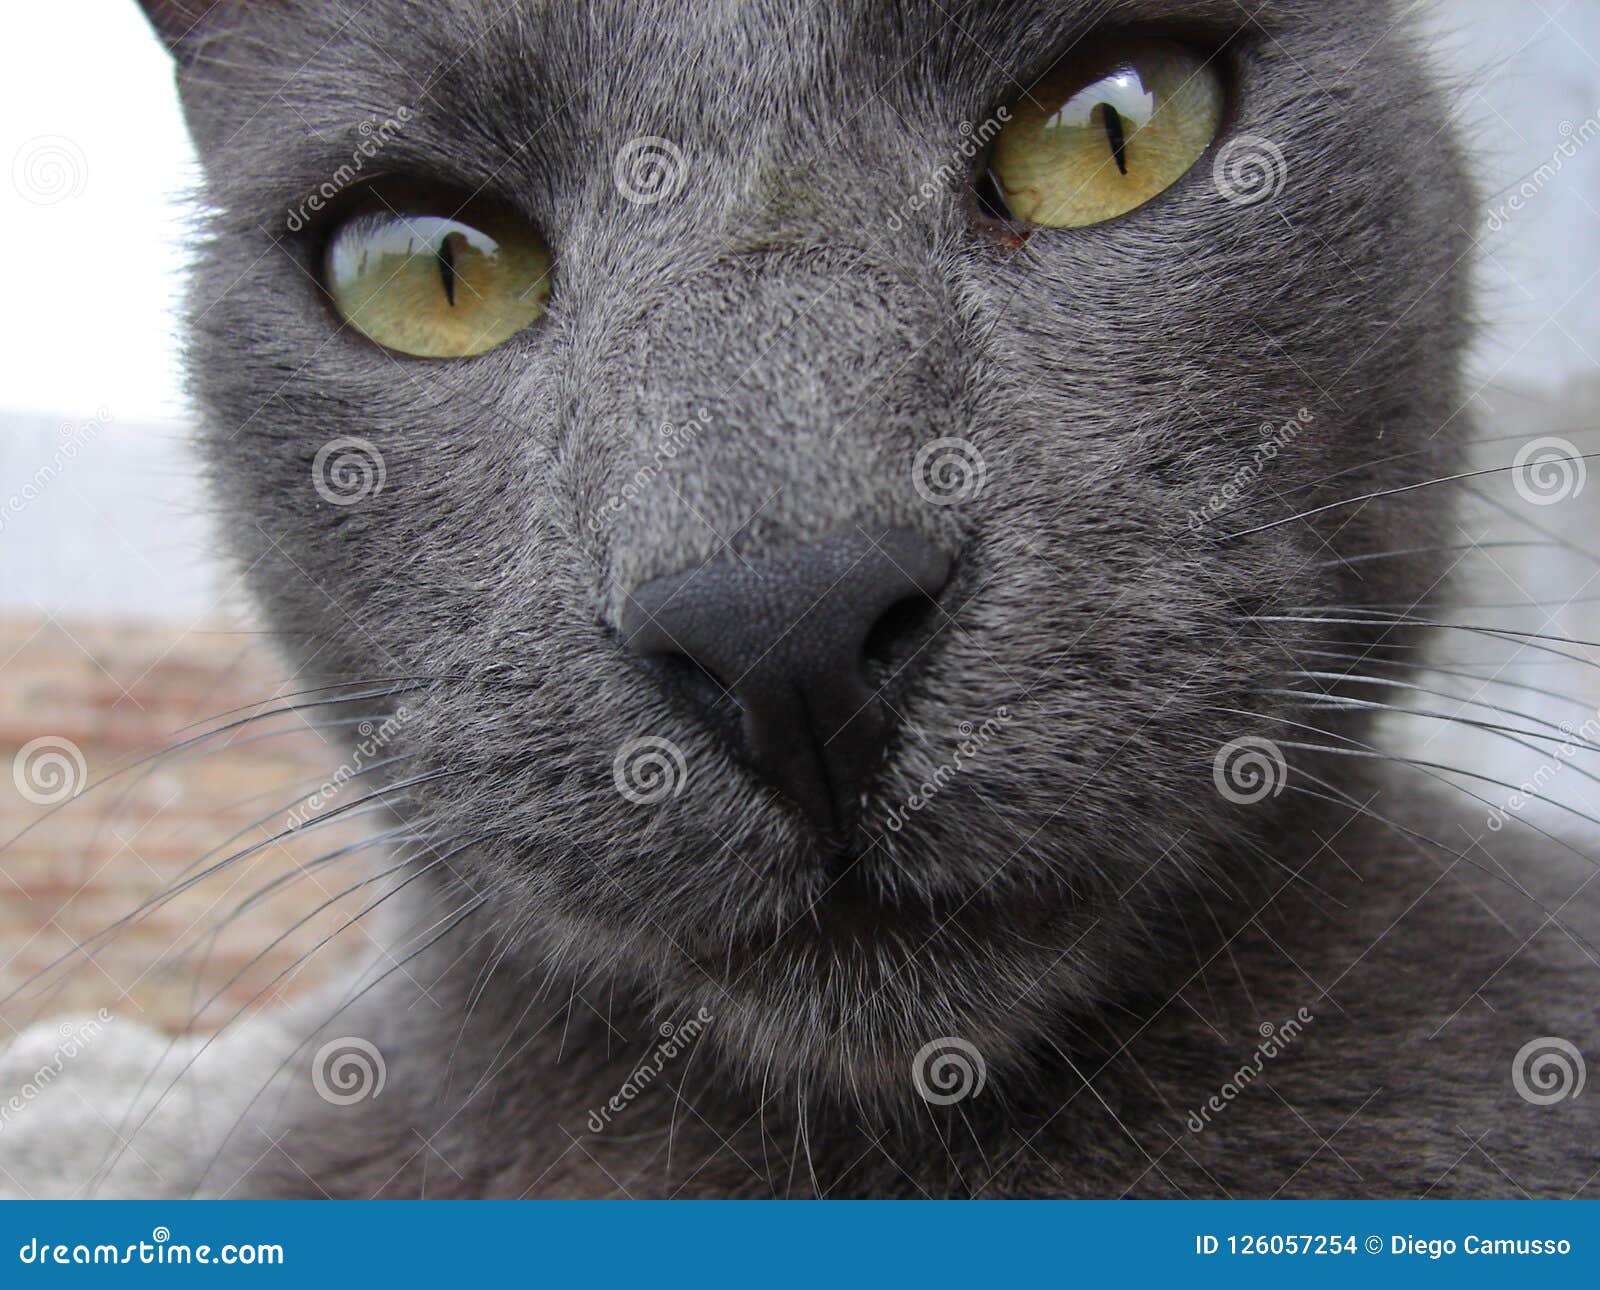 beautiful portrait of gray cat face in the foreground